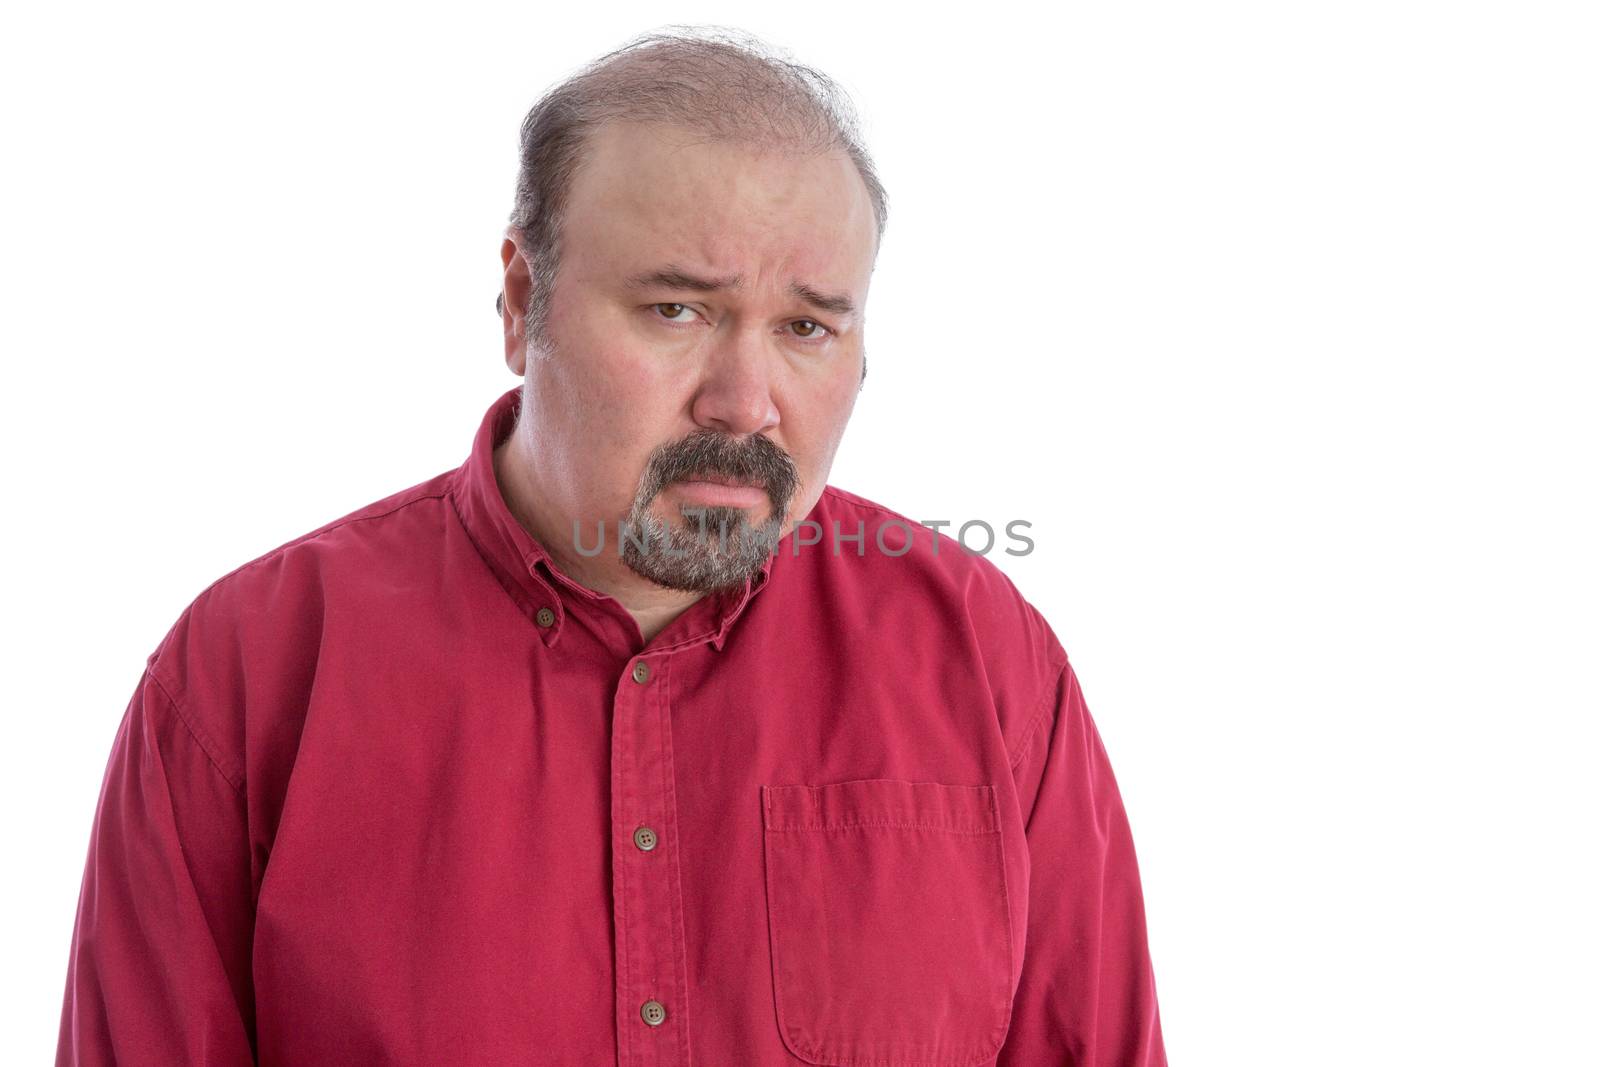 Upset and disappointed bald frowning middle-aged man looking at camera with a depressed facial expression, isolated portrait on white